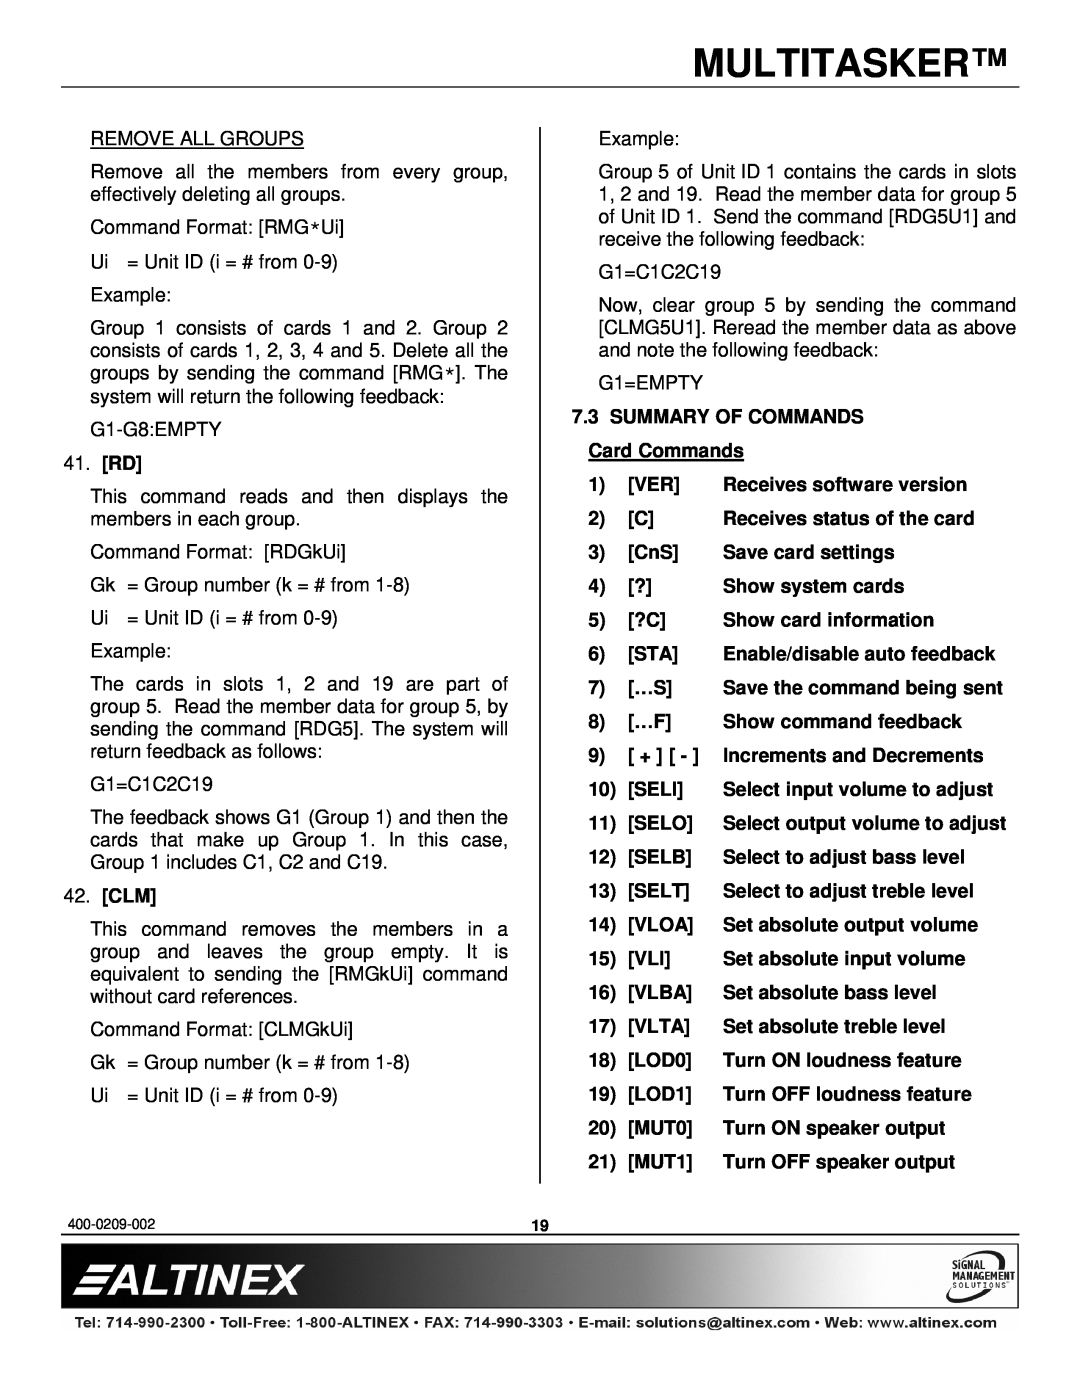 Altinex MT113-101 41.RD, 42.CLM, 7.3SUMMARY OF COMMANDS Card Commands, 1 VER, 2C Receives status of the card, 3 CnS, Seli 